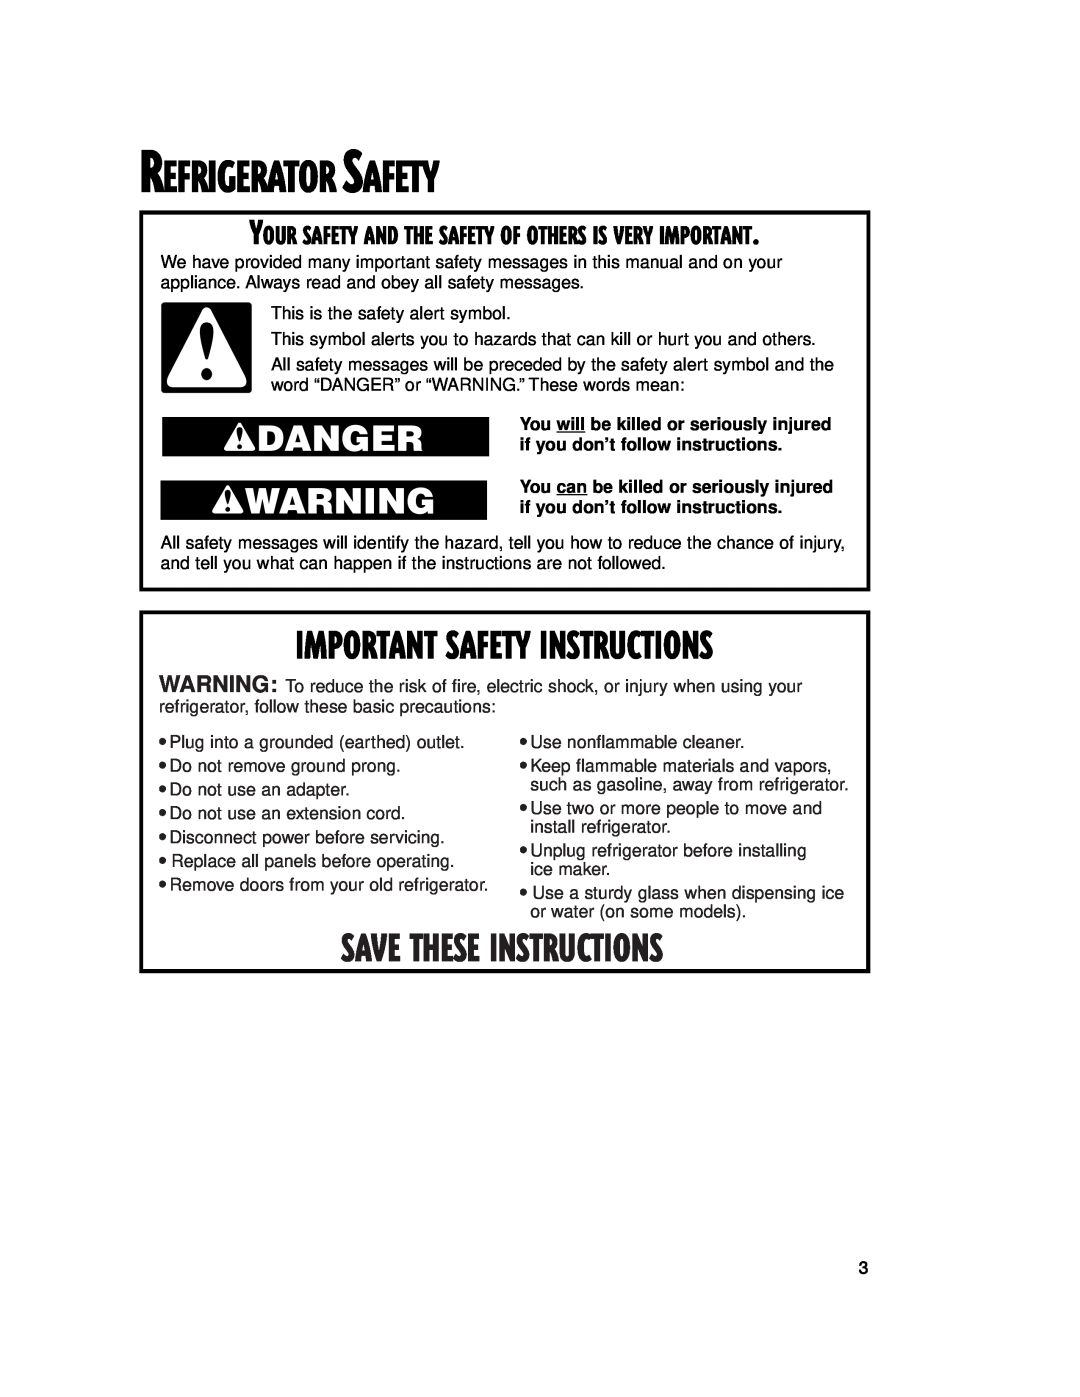 Whirlpool 2201959 manual Refrigerator Safety, Save These Instructions, wDANGER wWARNING, Important Safety Instructions 